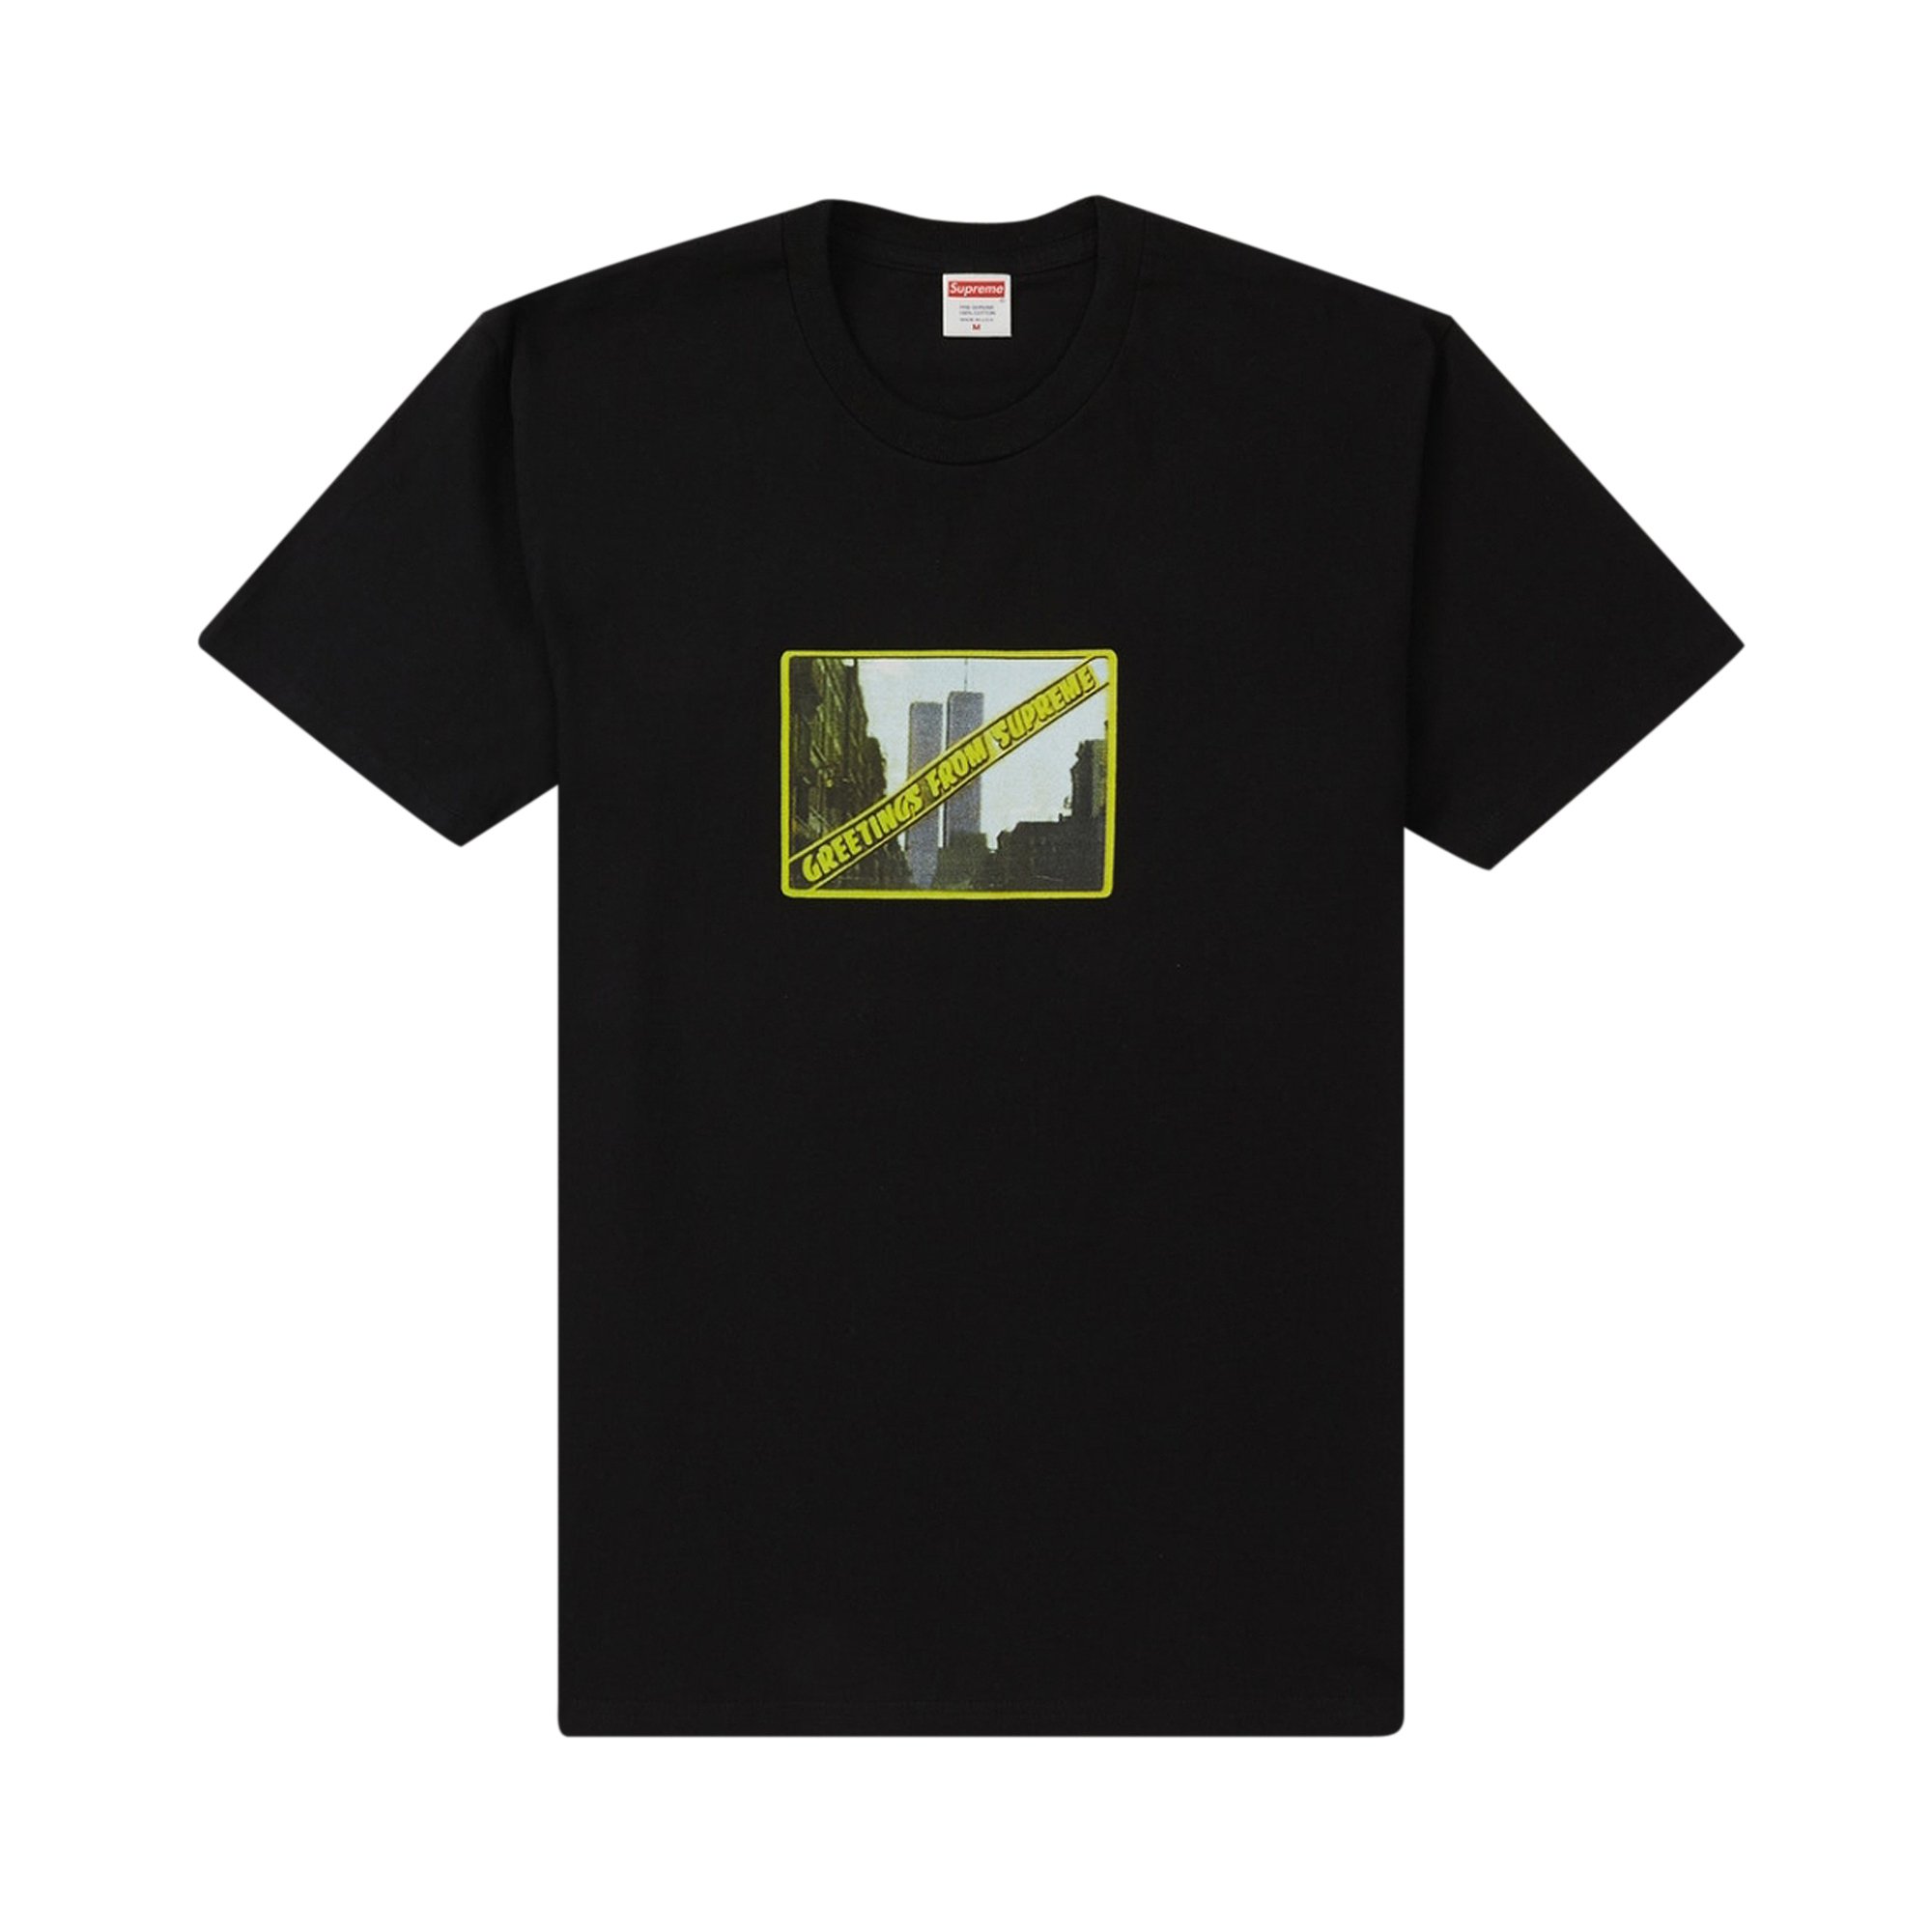 Buy Supreme Greetings From Ny Tee 'Black' - SS19T32 BLACK